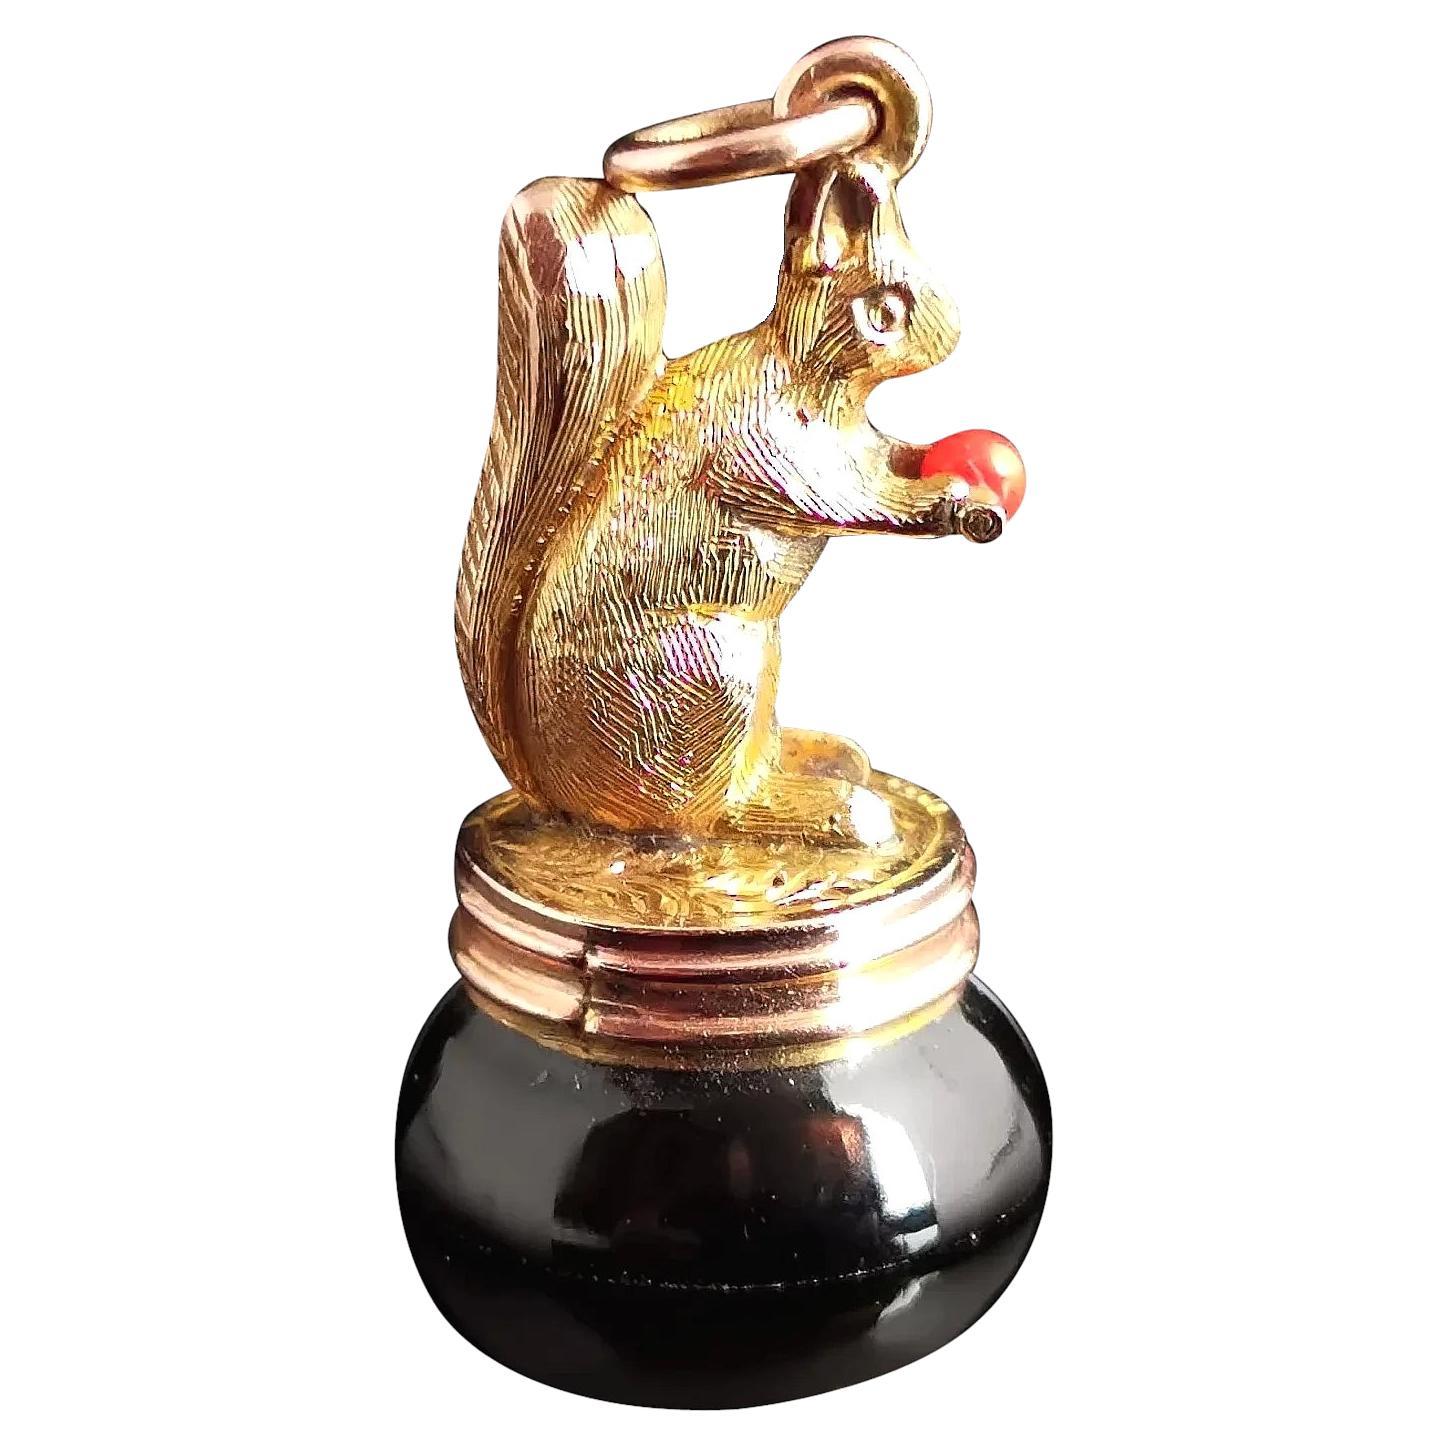 Antique 9k Gold Squirrel Figural Seal Fob, Banded Agate and Coral